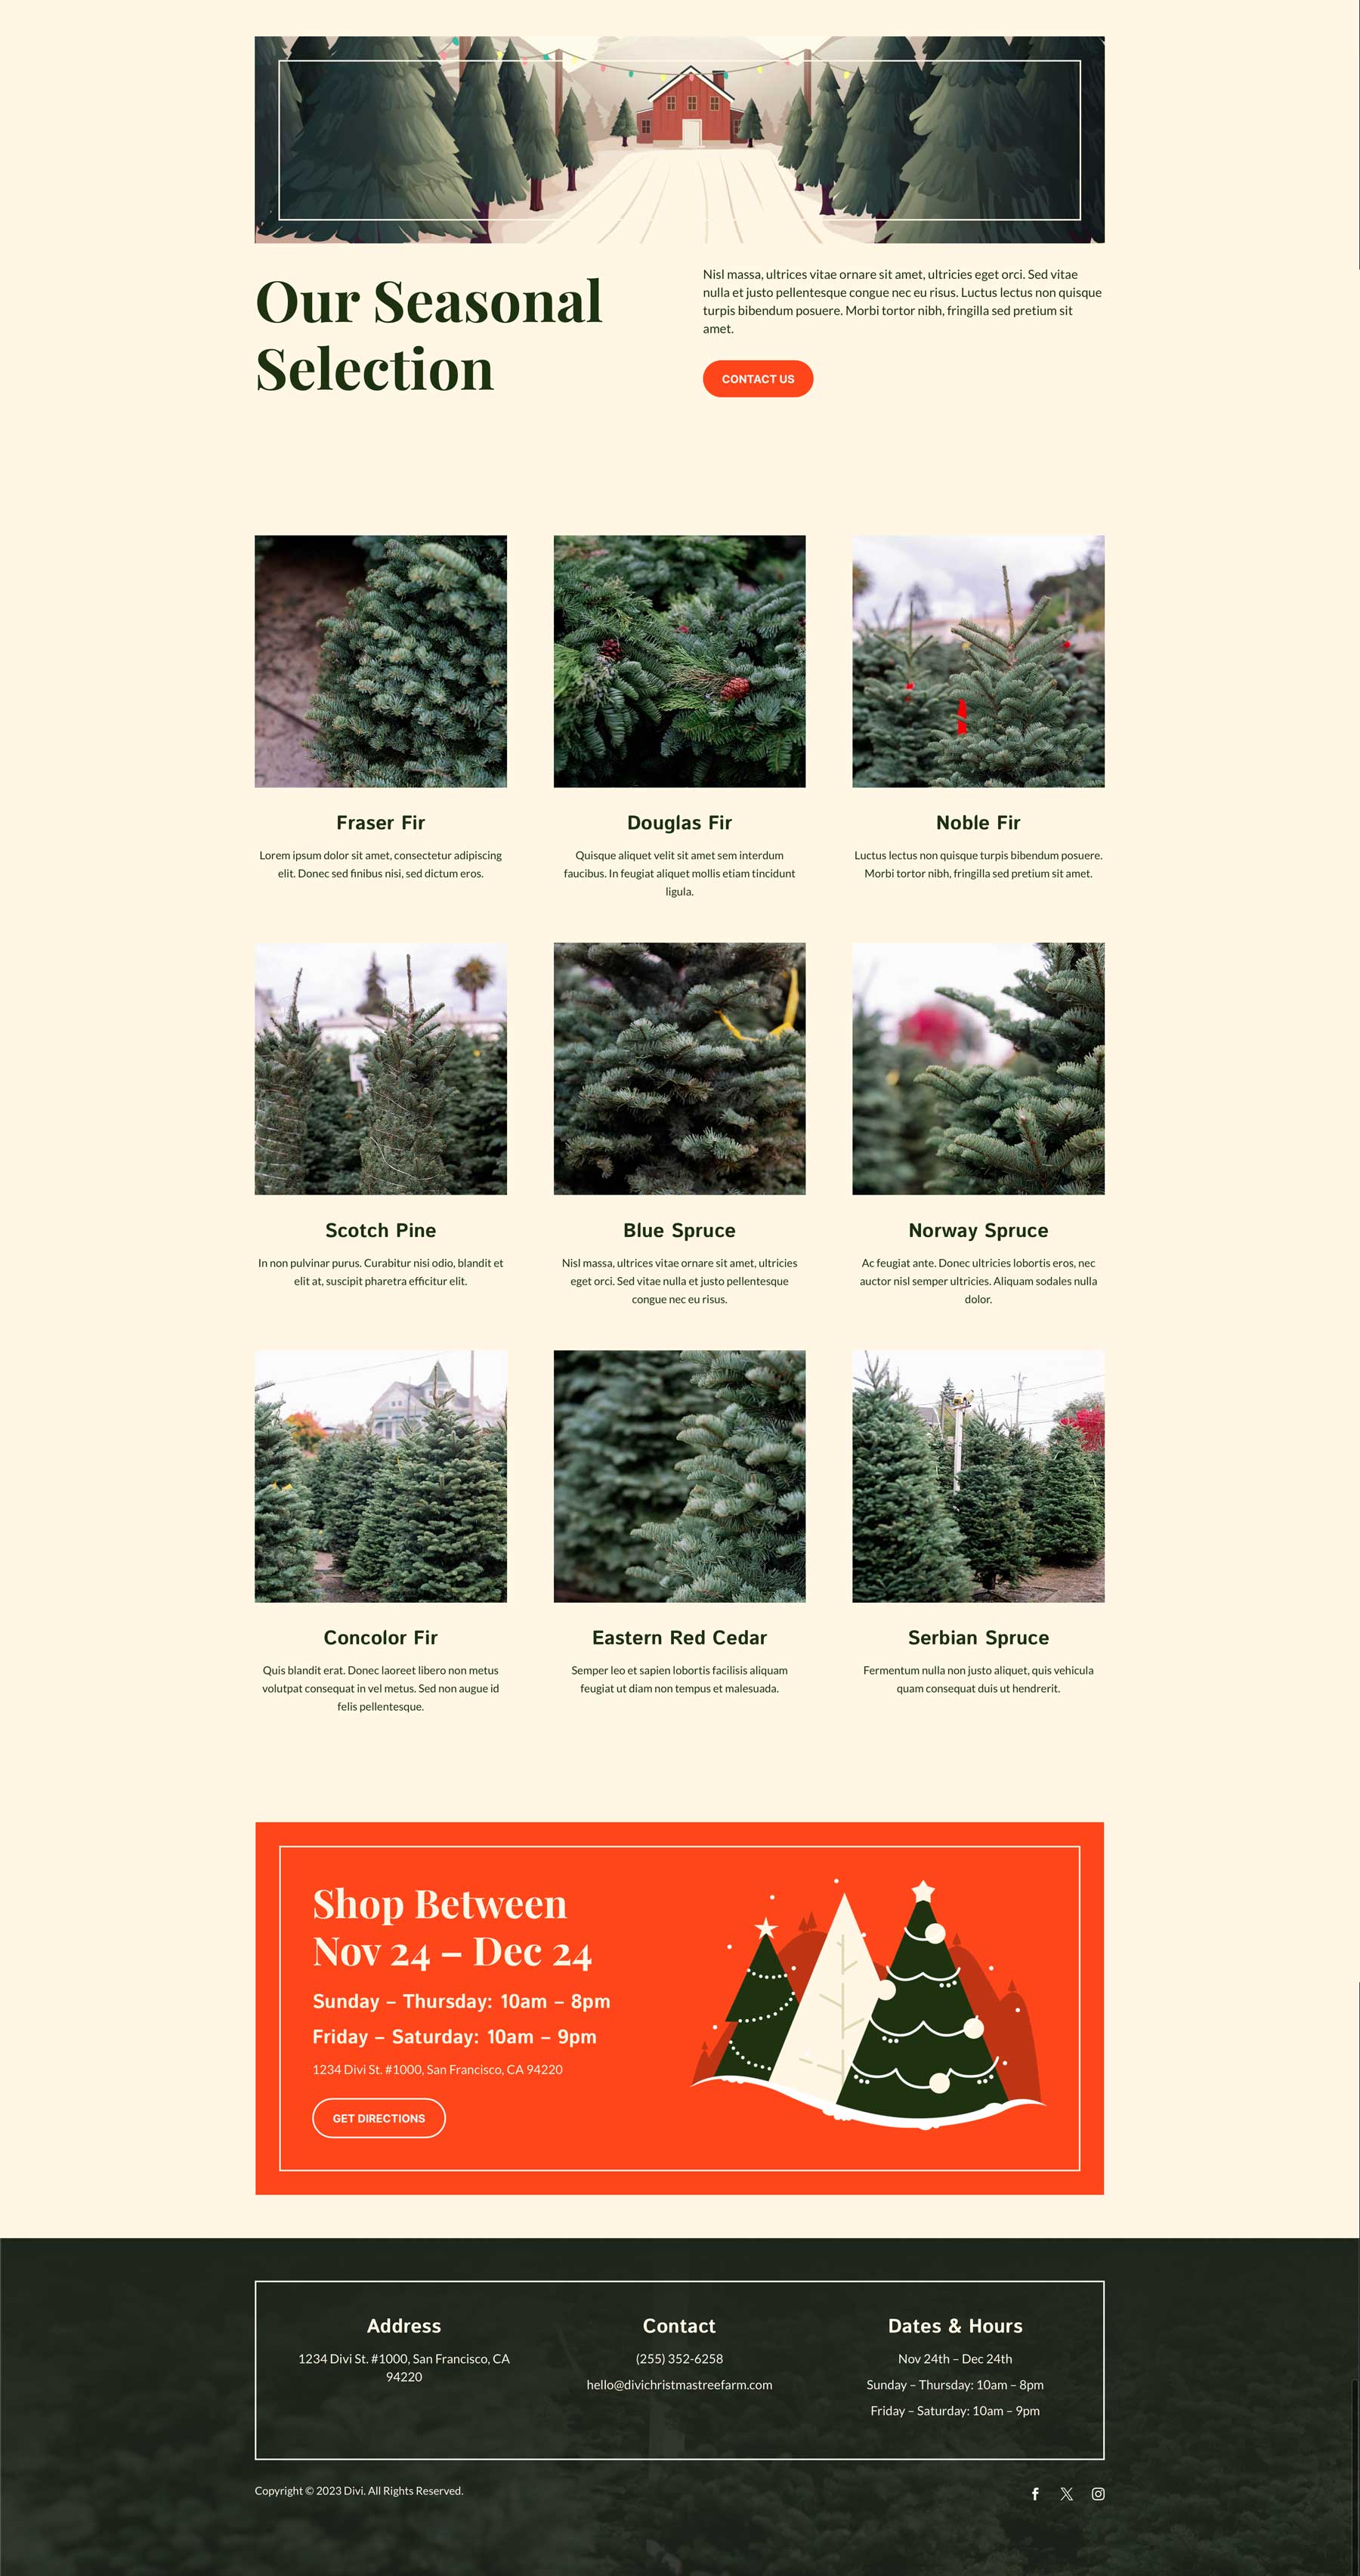 Christmas Tree Farm Layout Pack for Divi